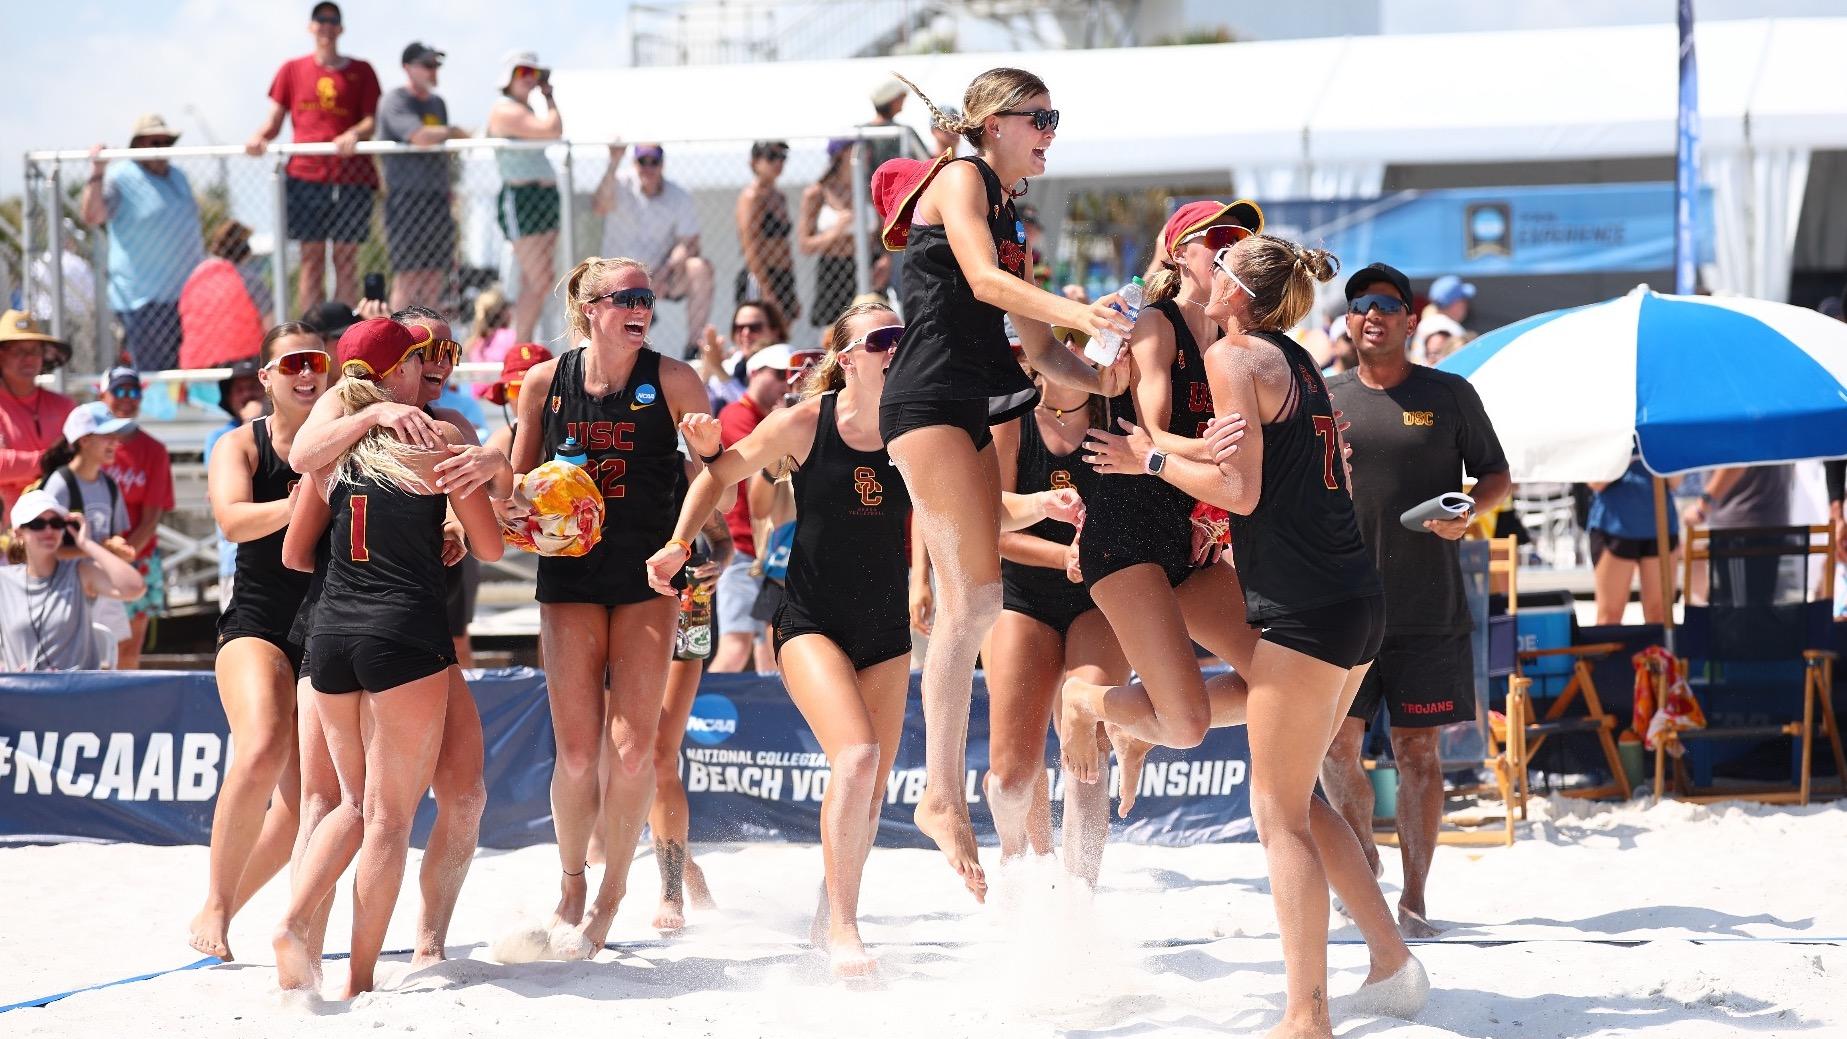 Women of Troy win fourth consecutive beach volleyball national
championship